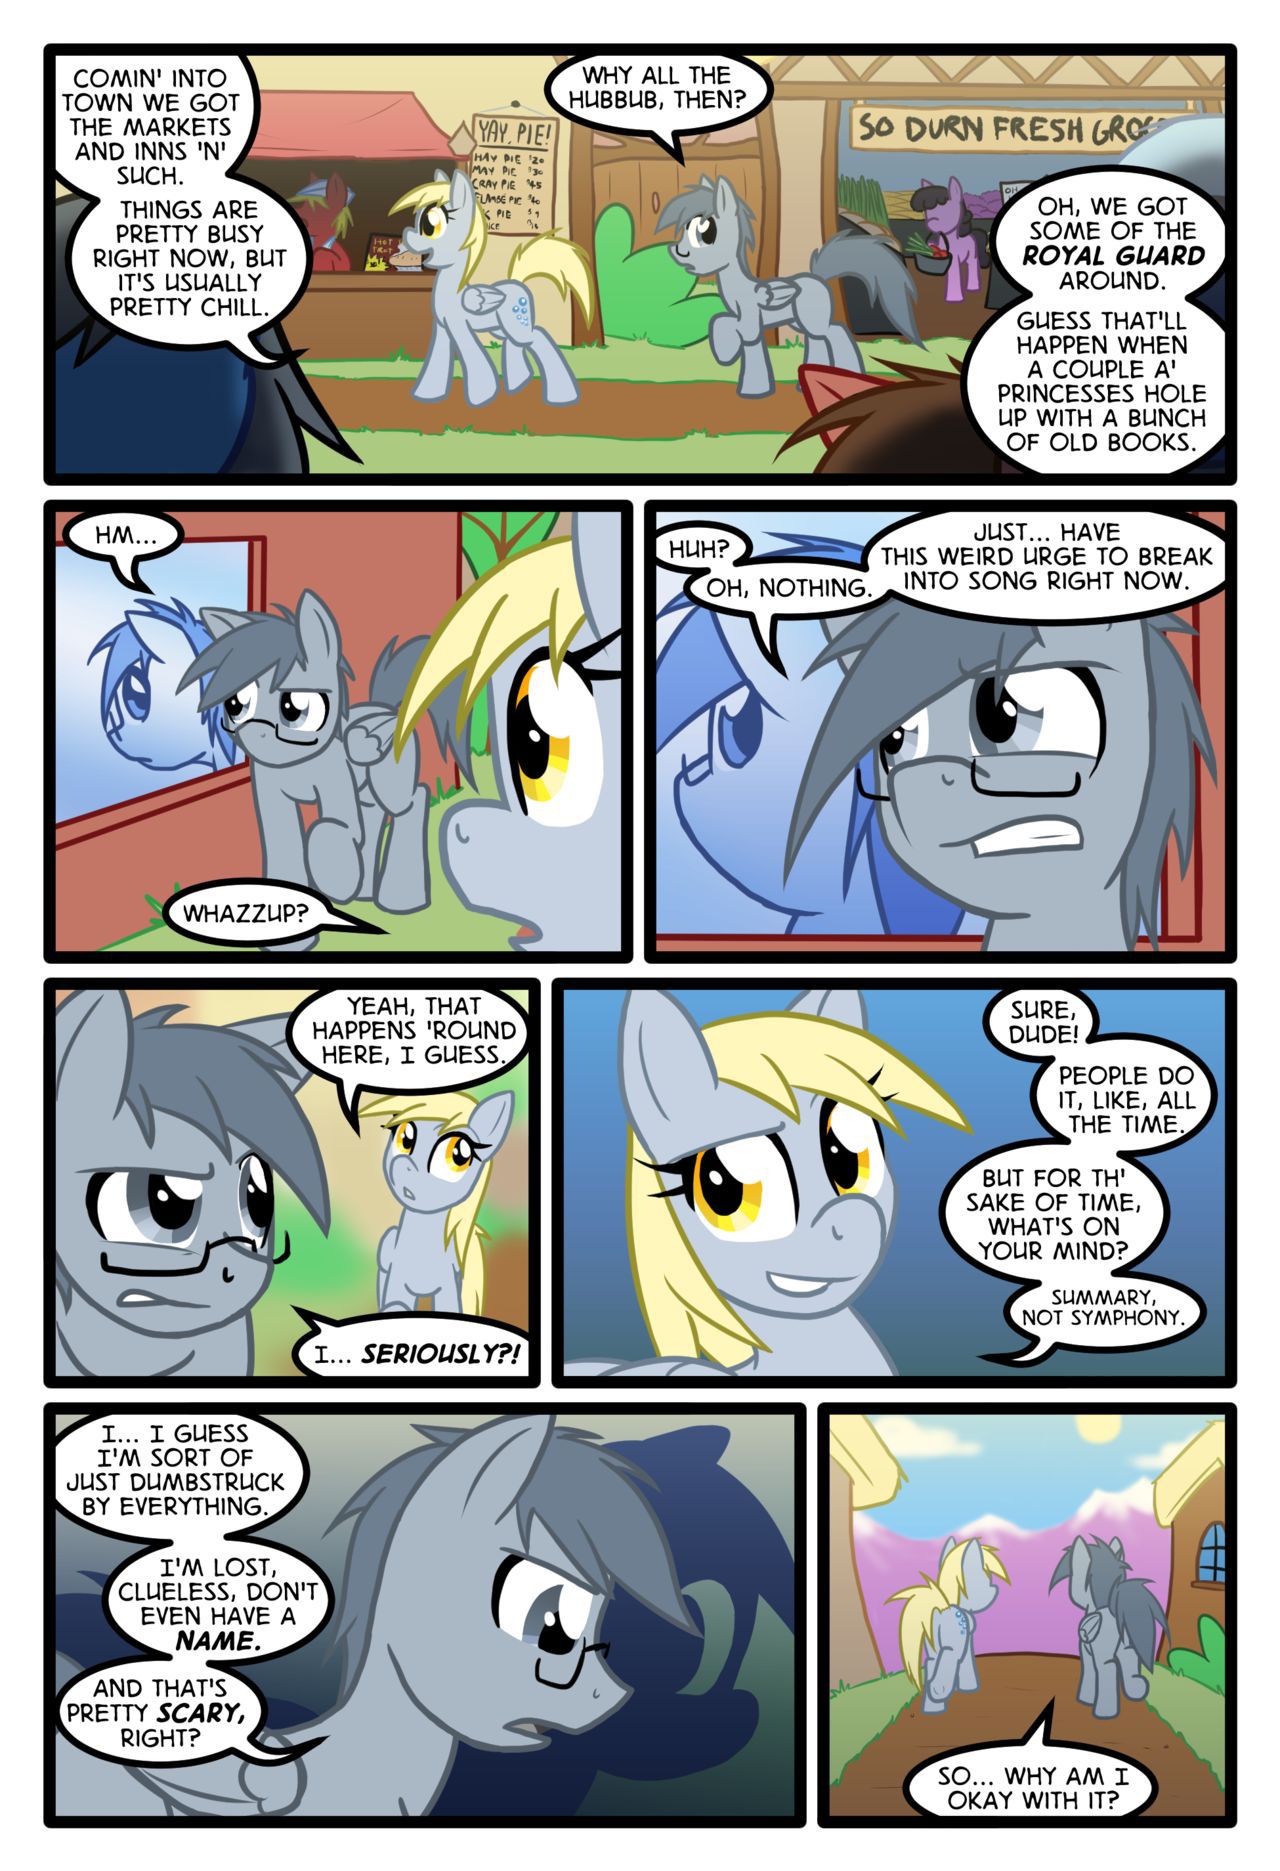 [Zaron] Lonely Hooves (My Little Pony Friendship Is Magic) [Ongoing] 13